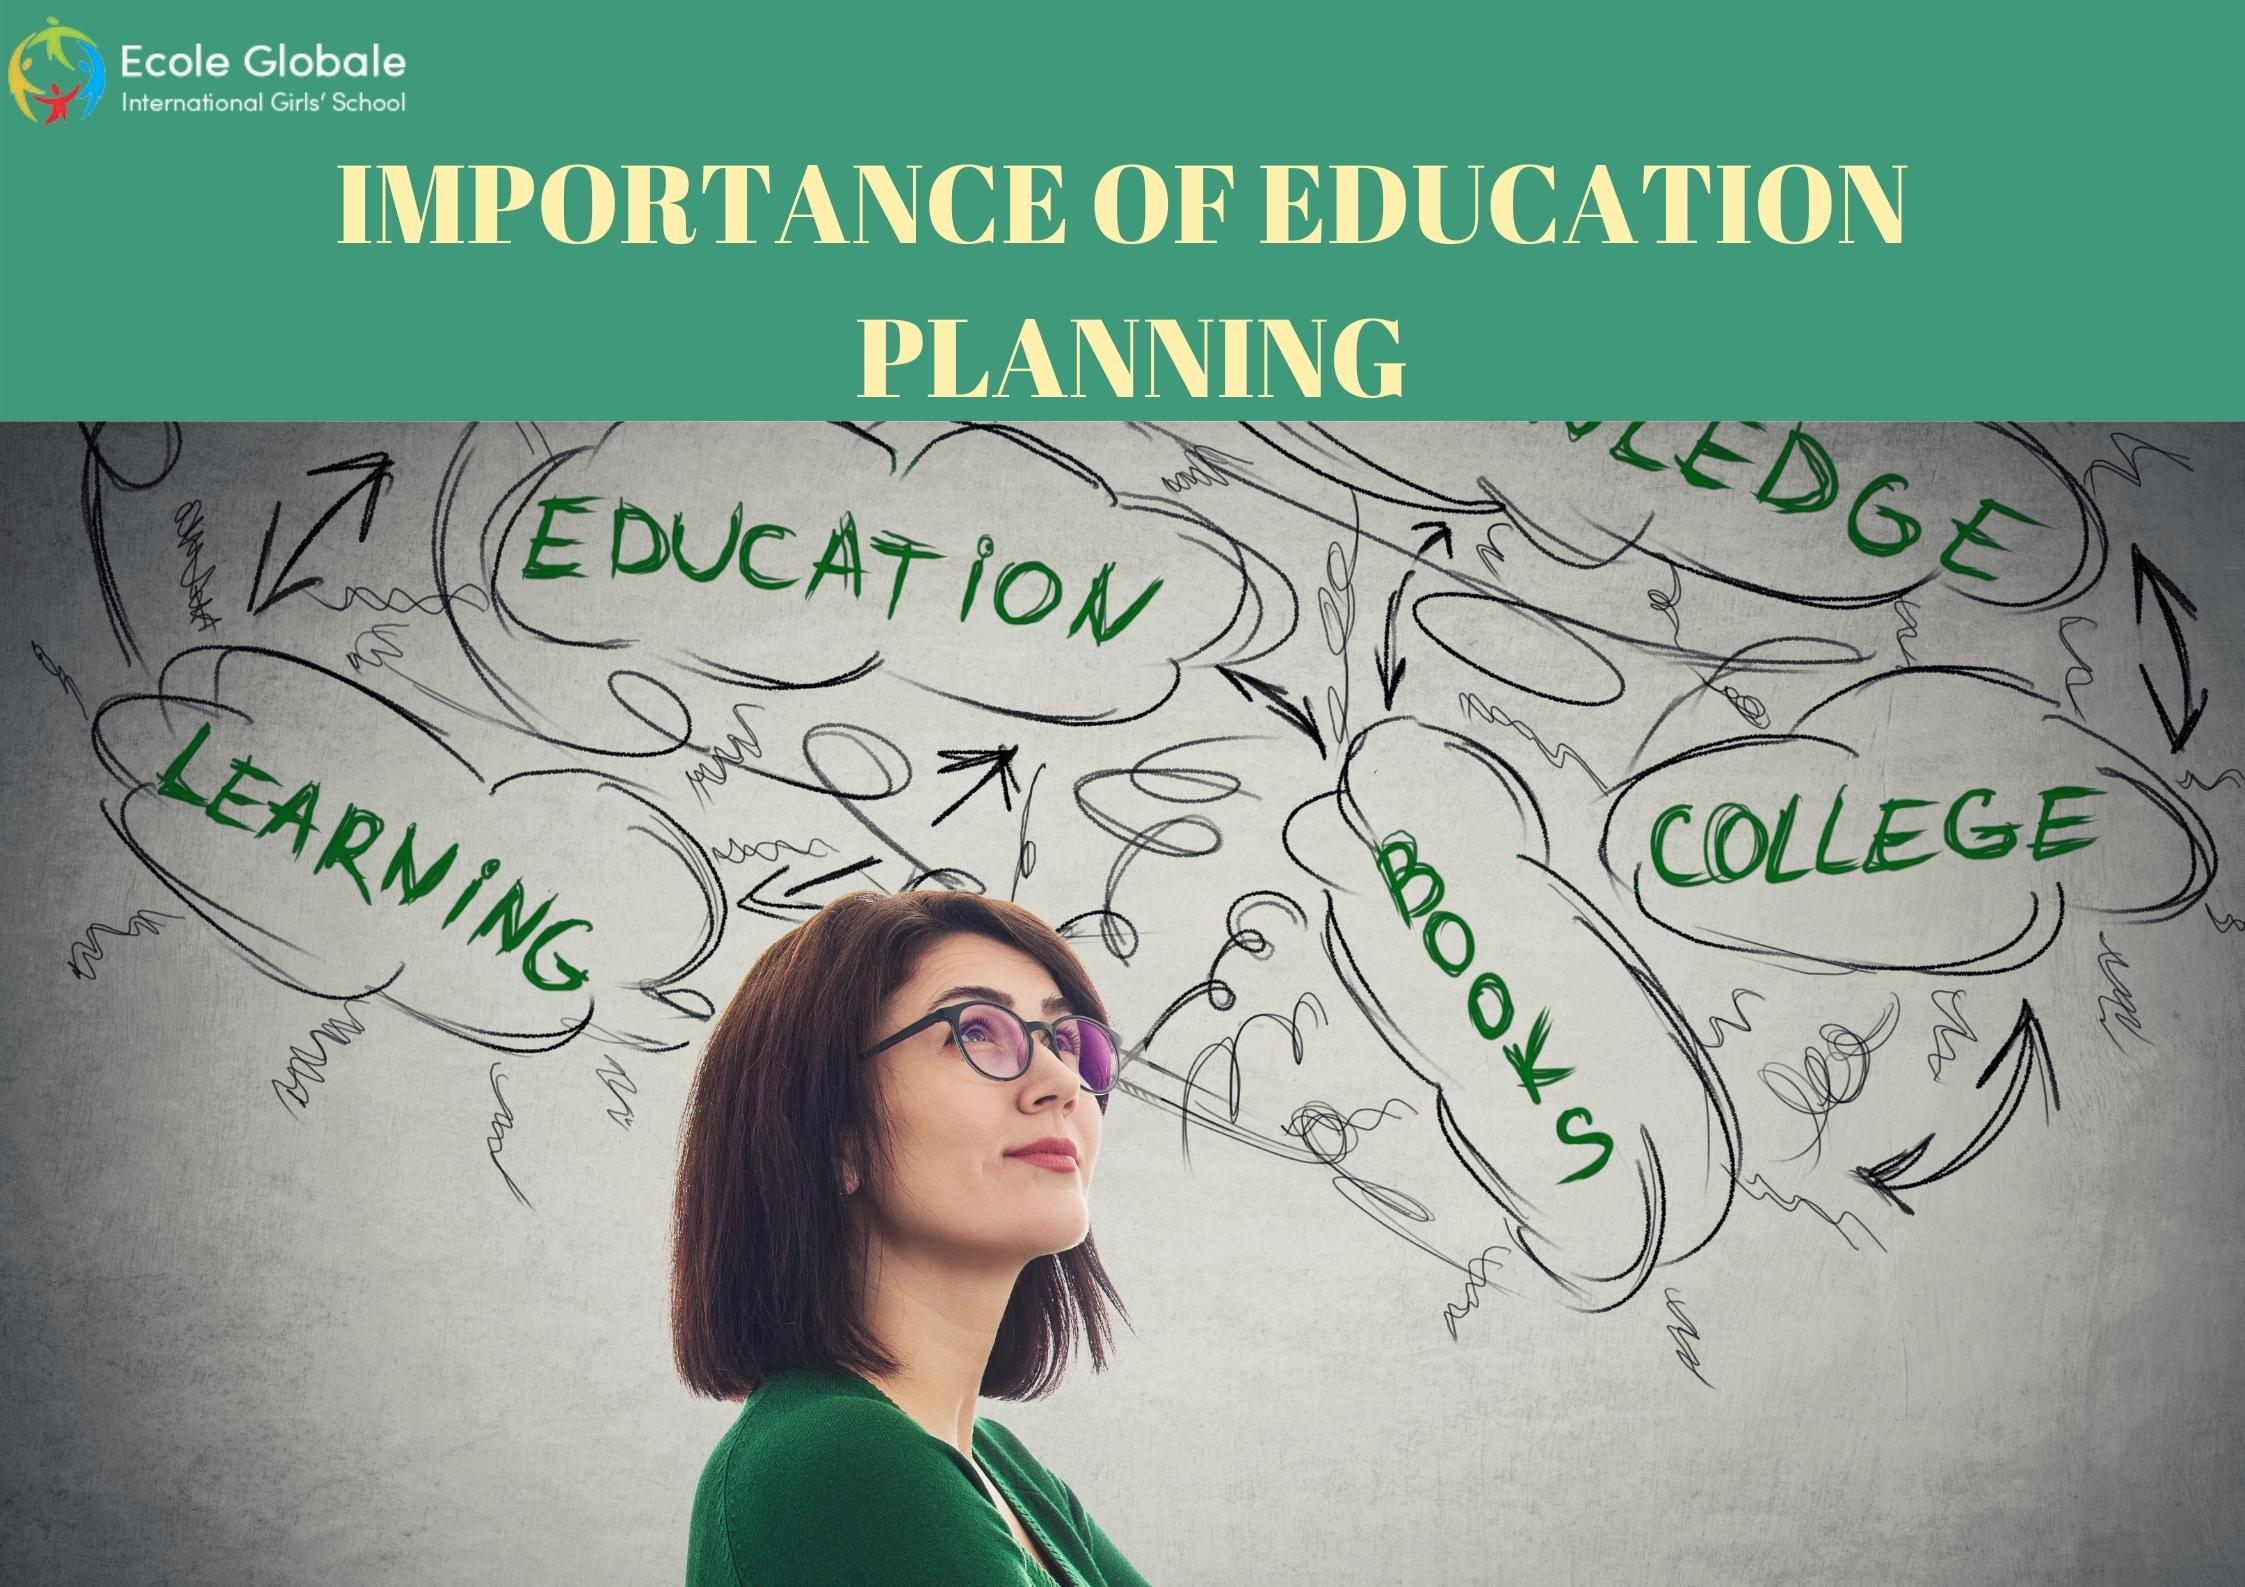 What is the importance of education planning?